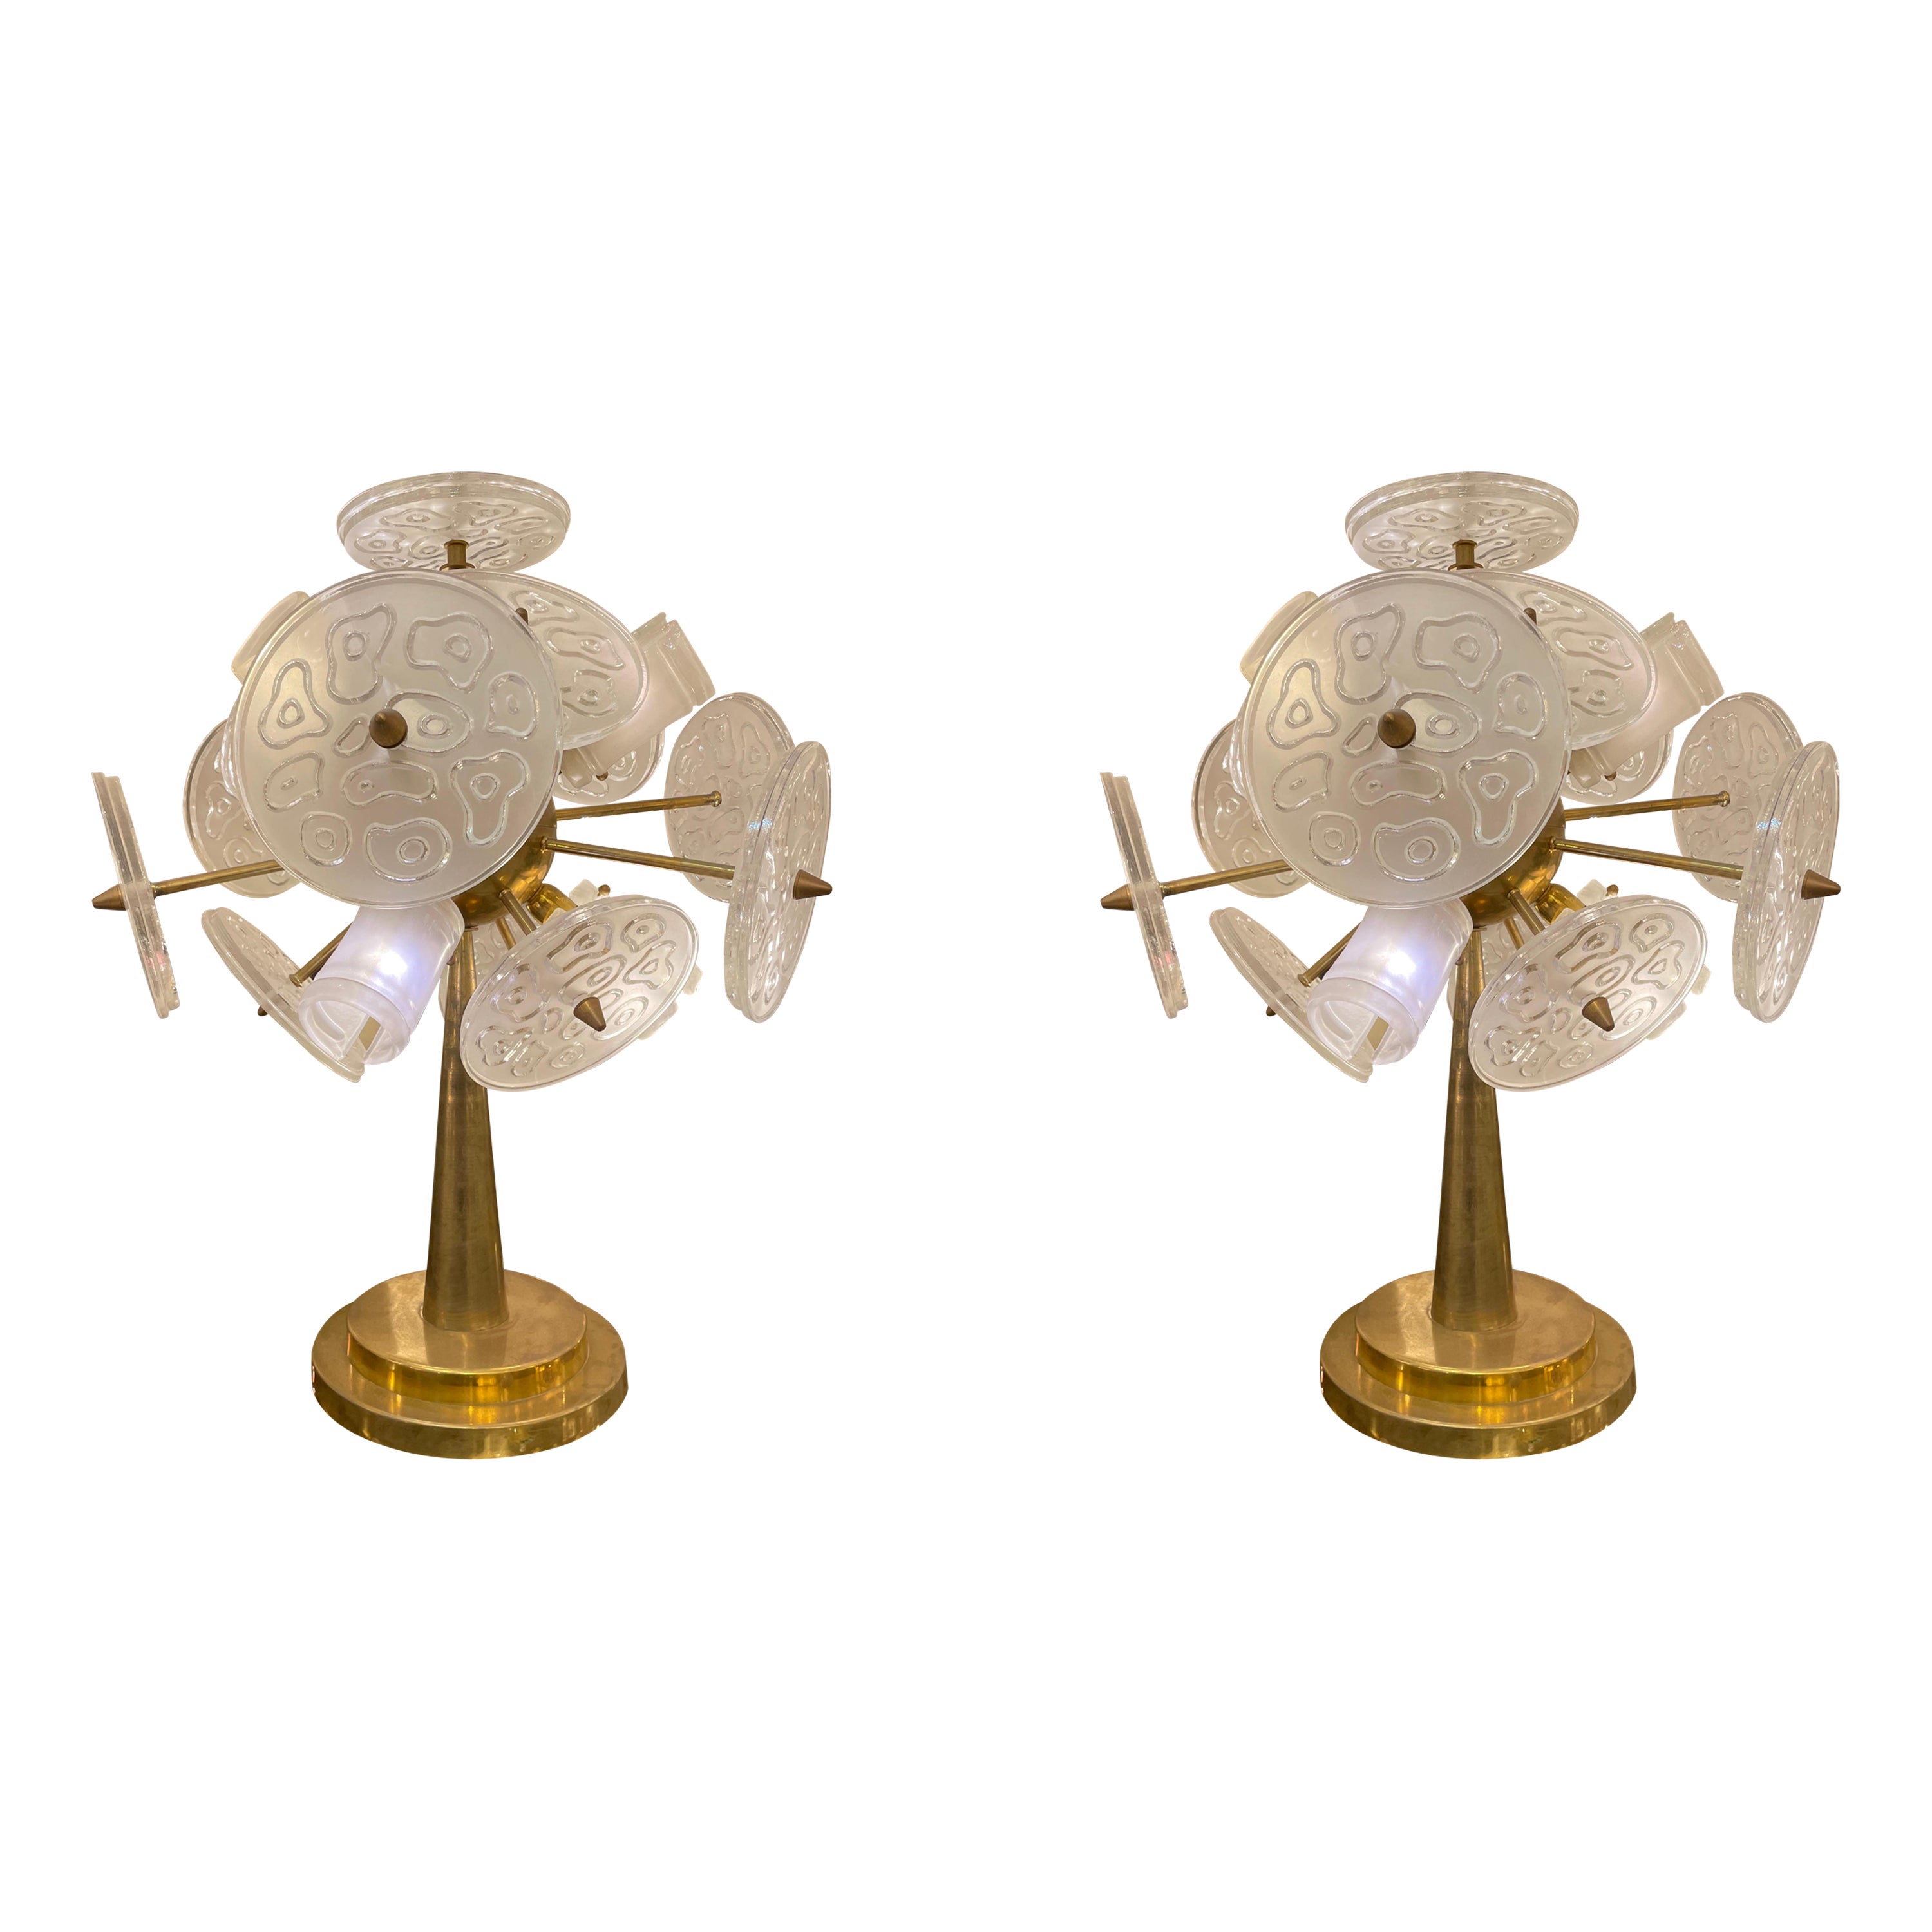 Outstanding Pair of Italian Table Lamps in Murano Glass, Italy 1960s For Sale